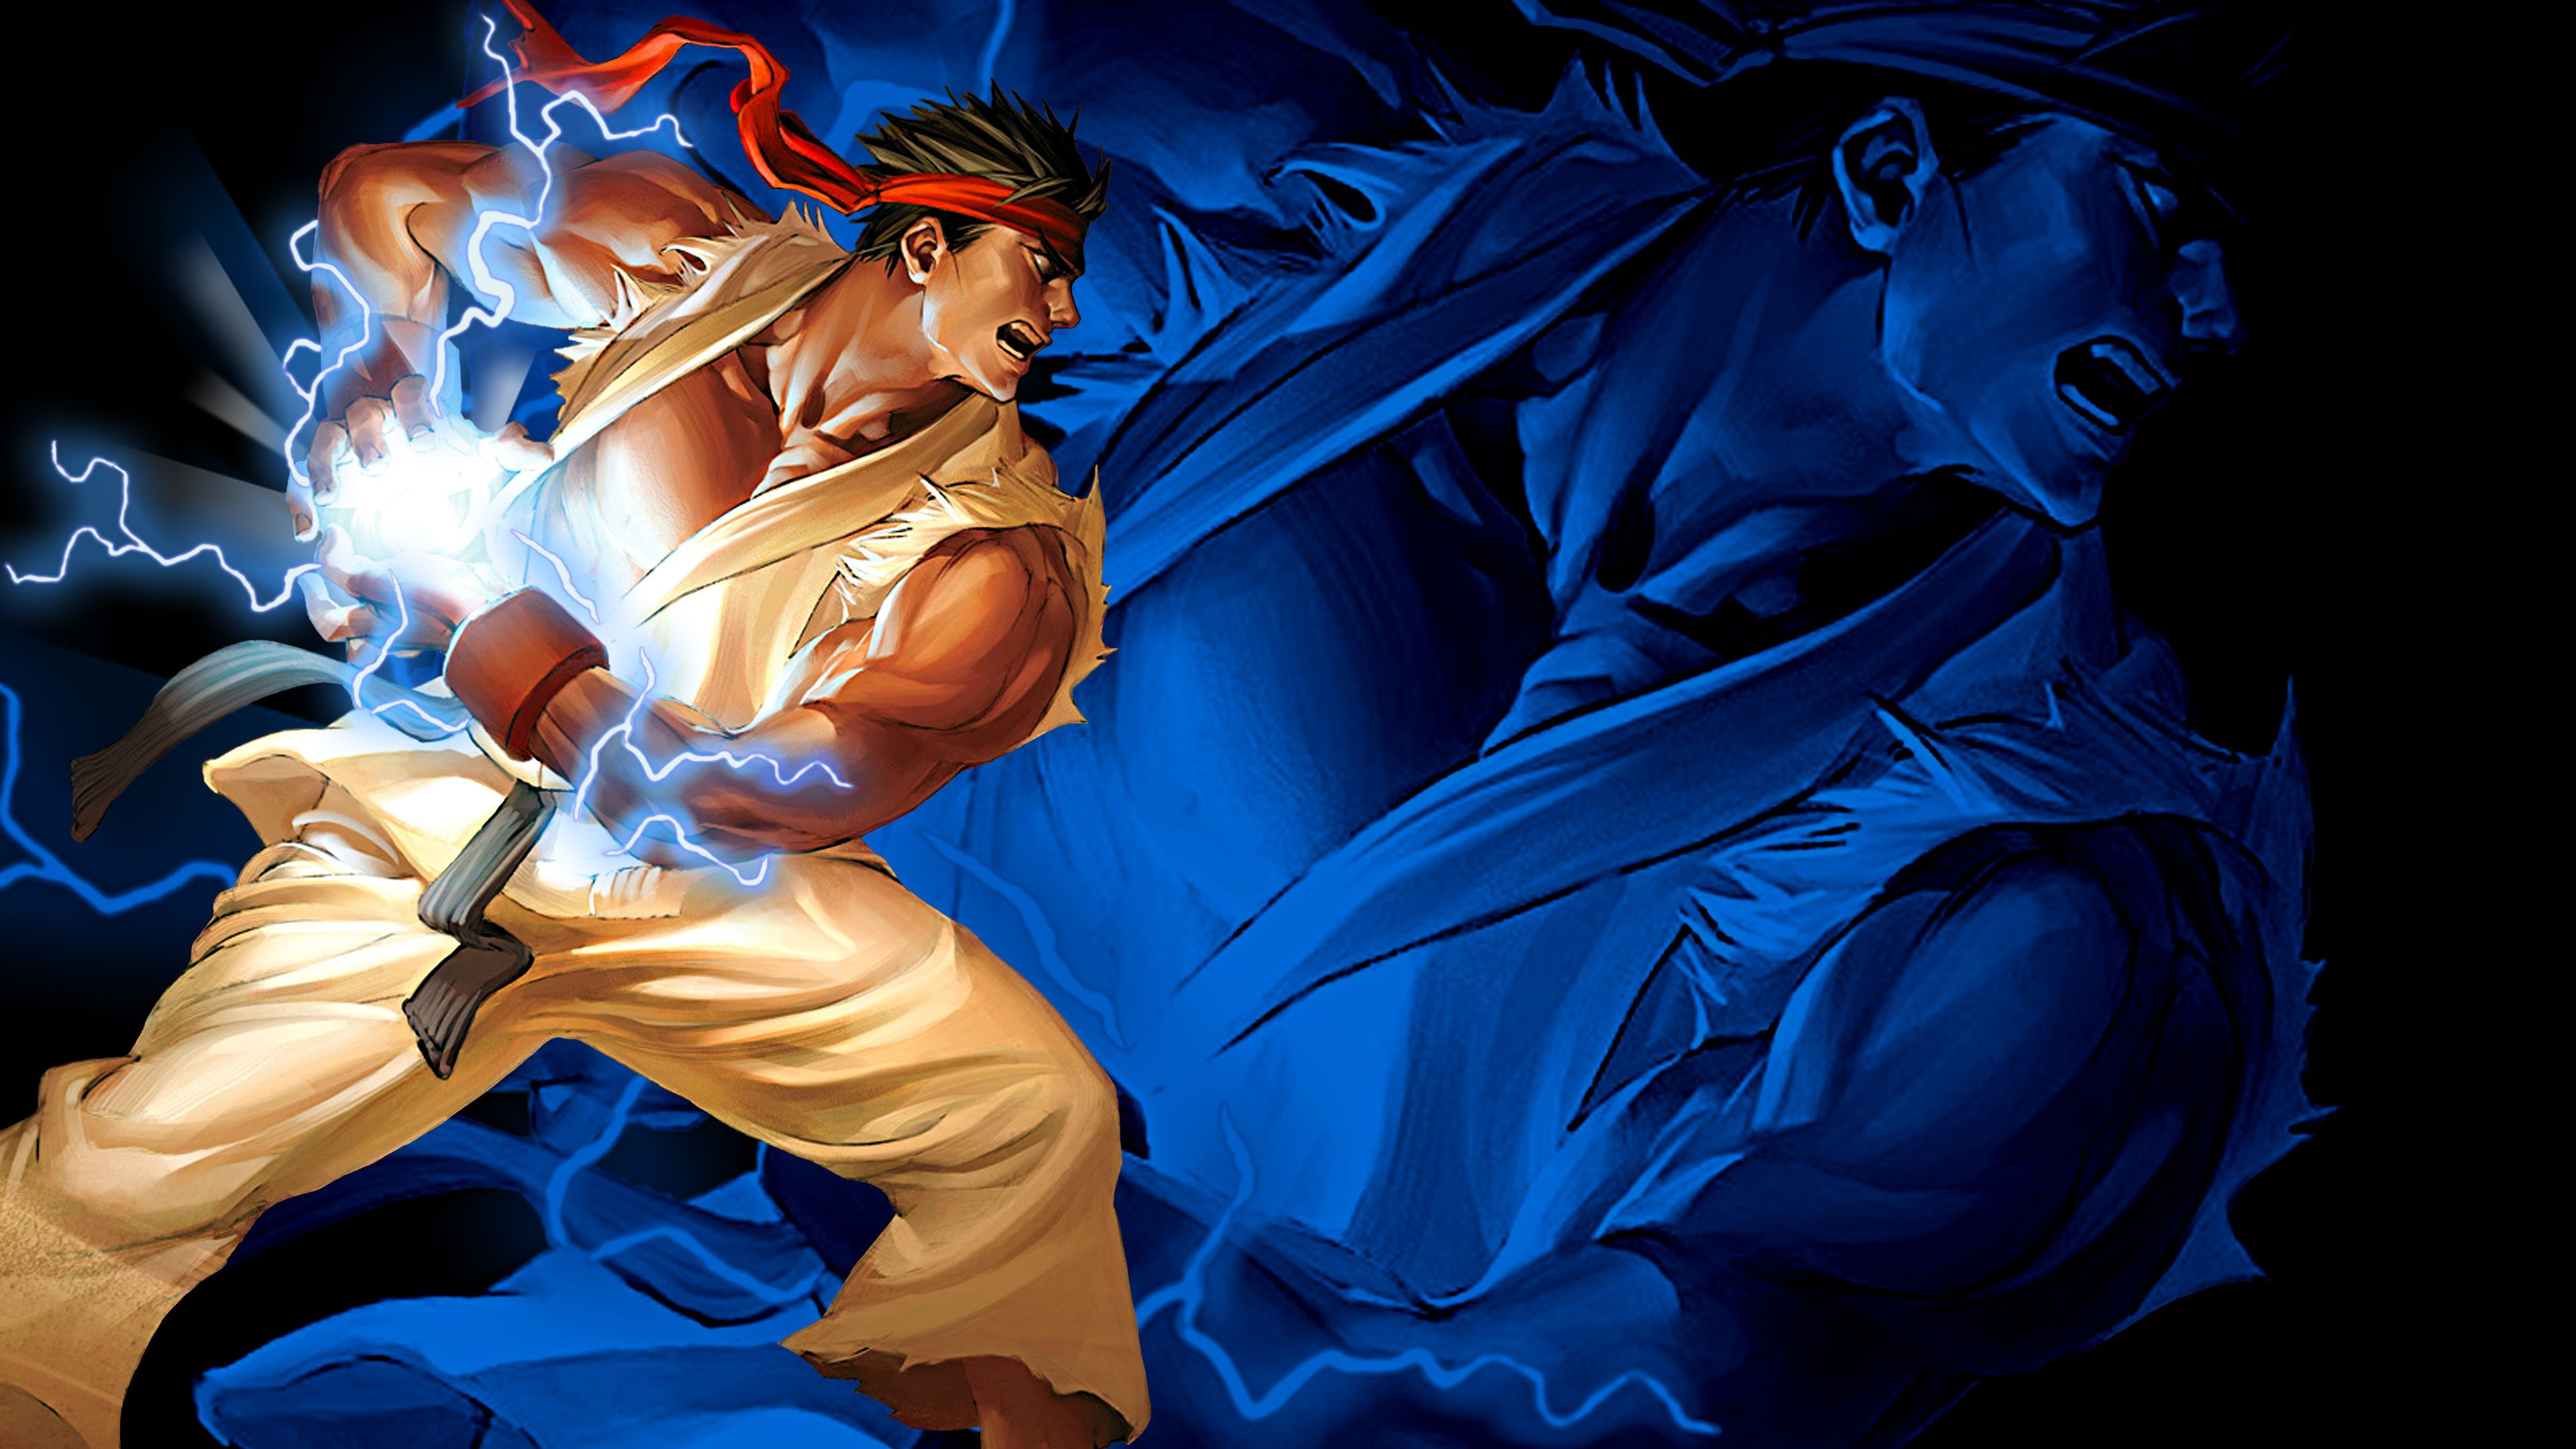 3840x2160 Ryu Hadouken Street Fighter 2 street fighter v wallpapers, hd-wallpapers, games wallpapers, 5k w&acirc;&#128;&brvbar; | Ryu street fighter, Street fighter wallpaper, Street fighter art